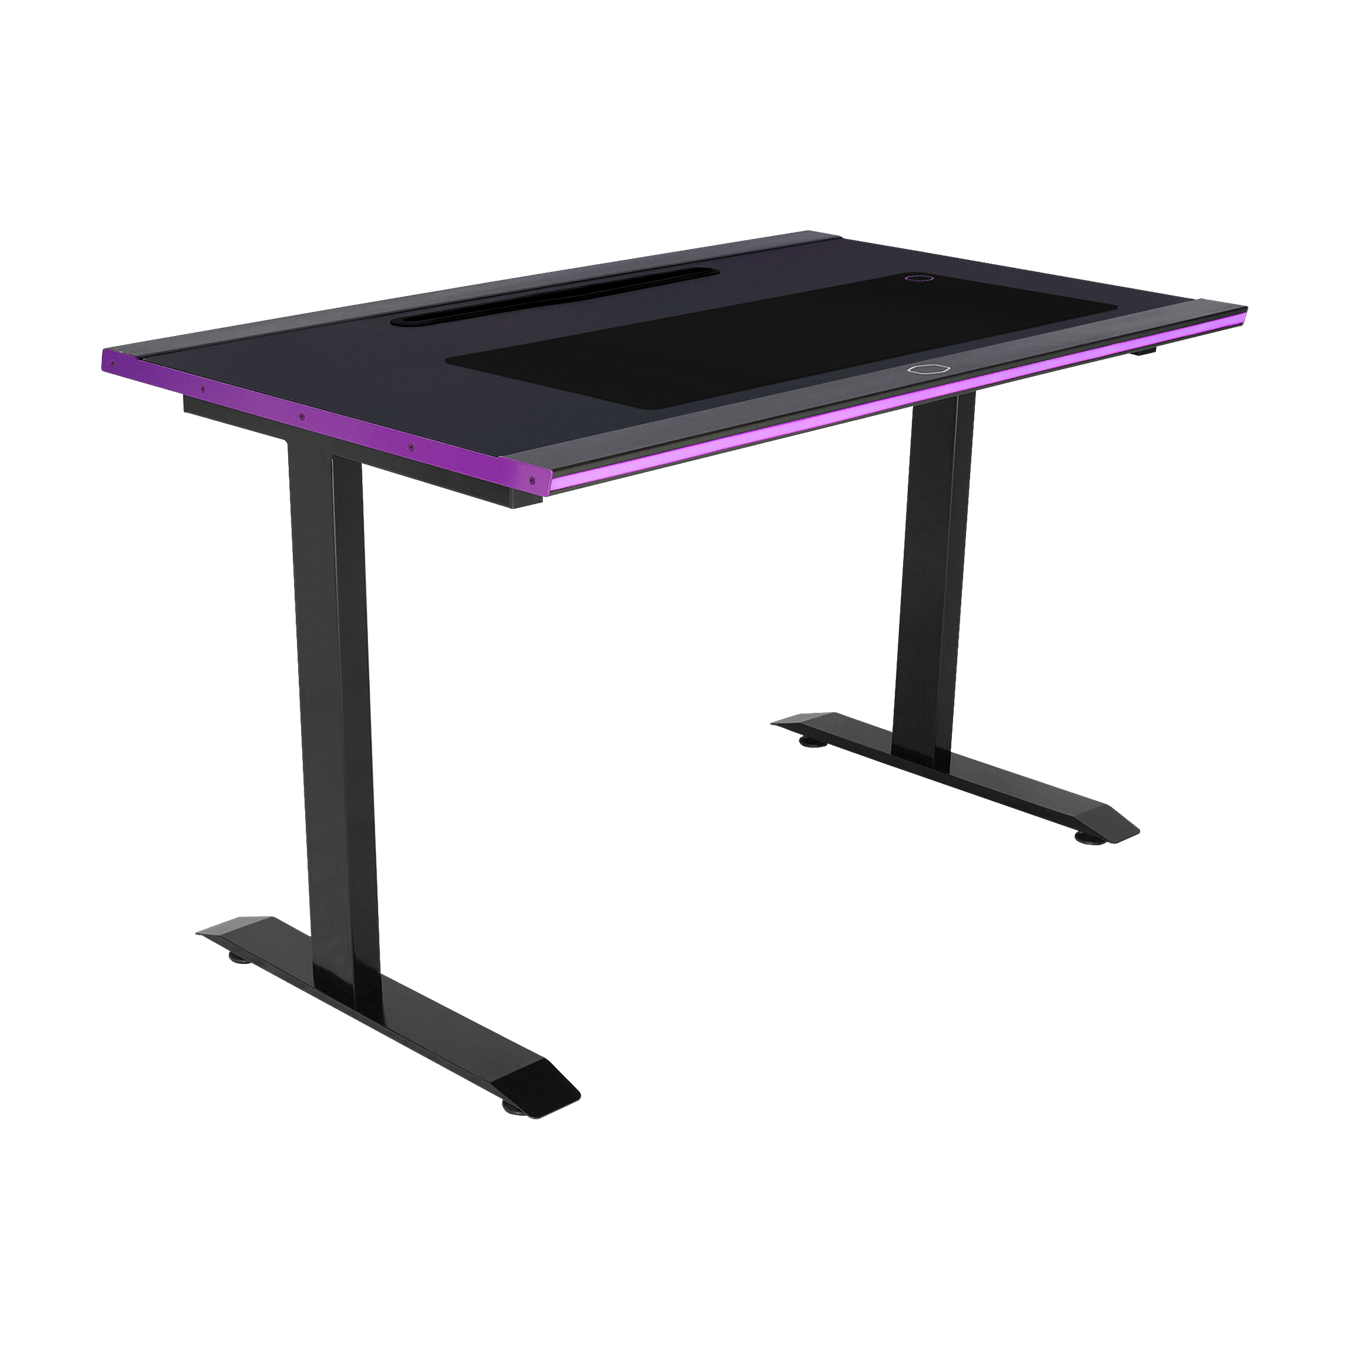 GD120 ARGB Gaming Desk - 45 degree angle of left tilt front view with purple LED lights